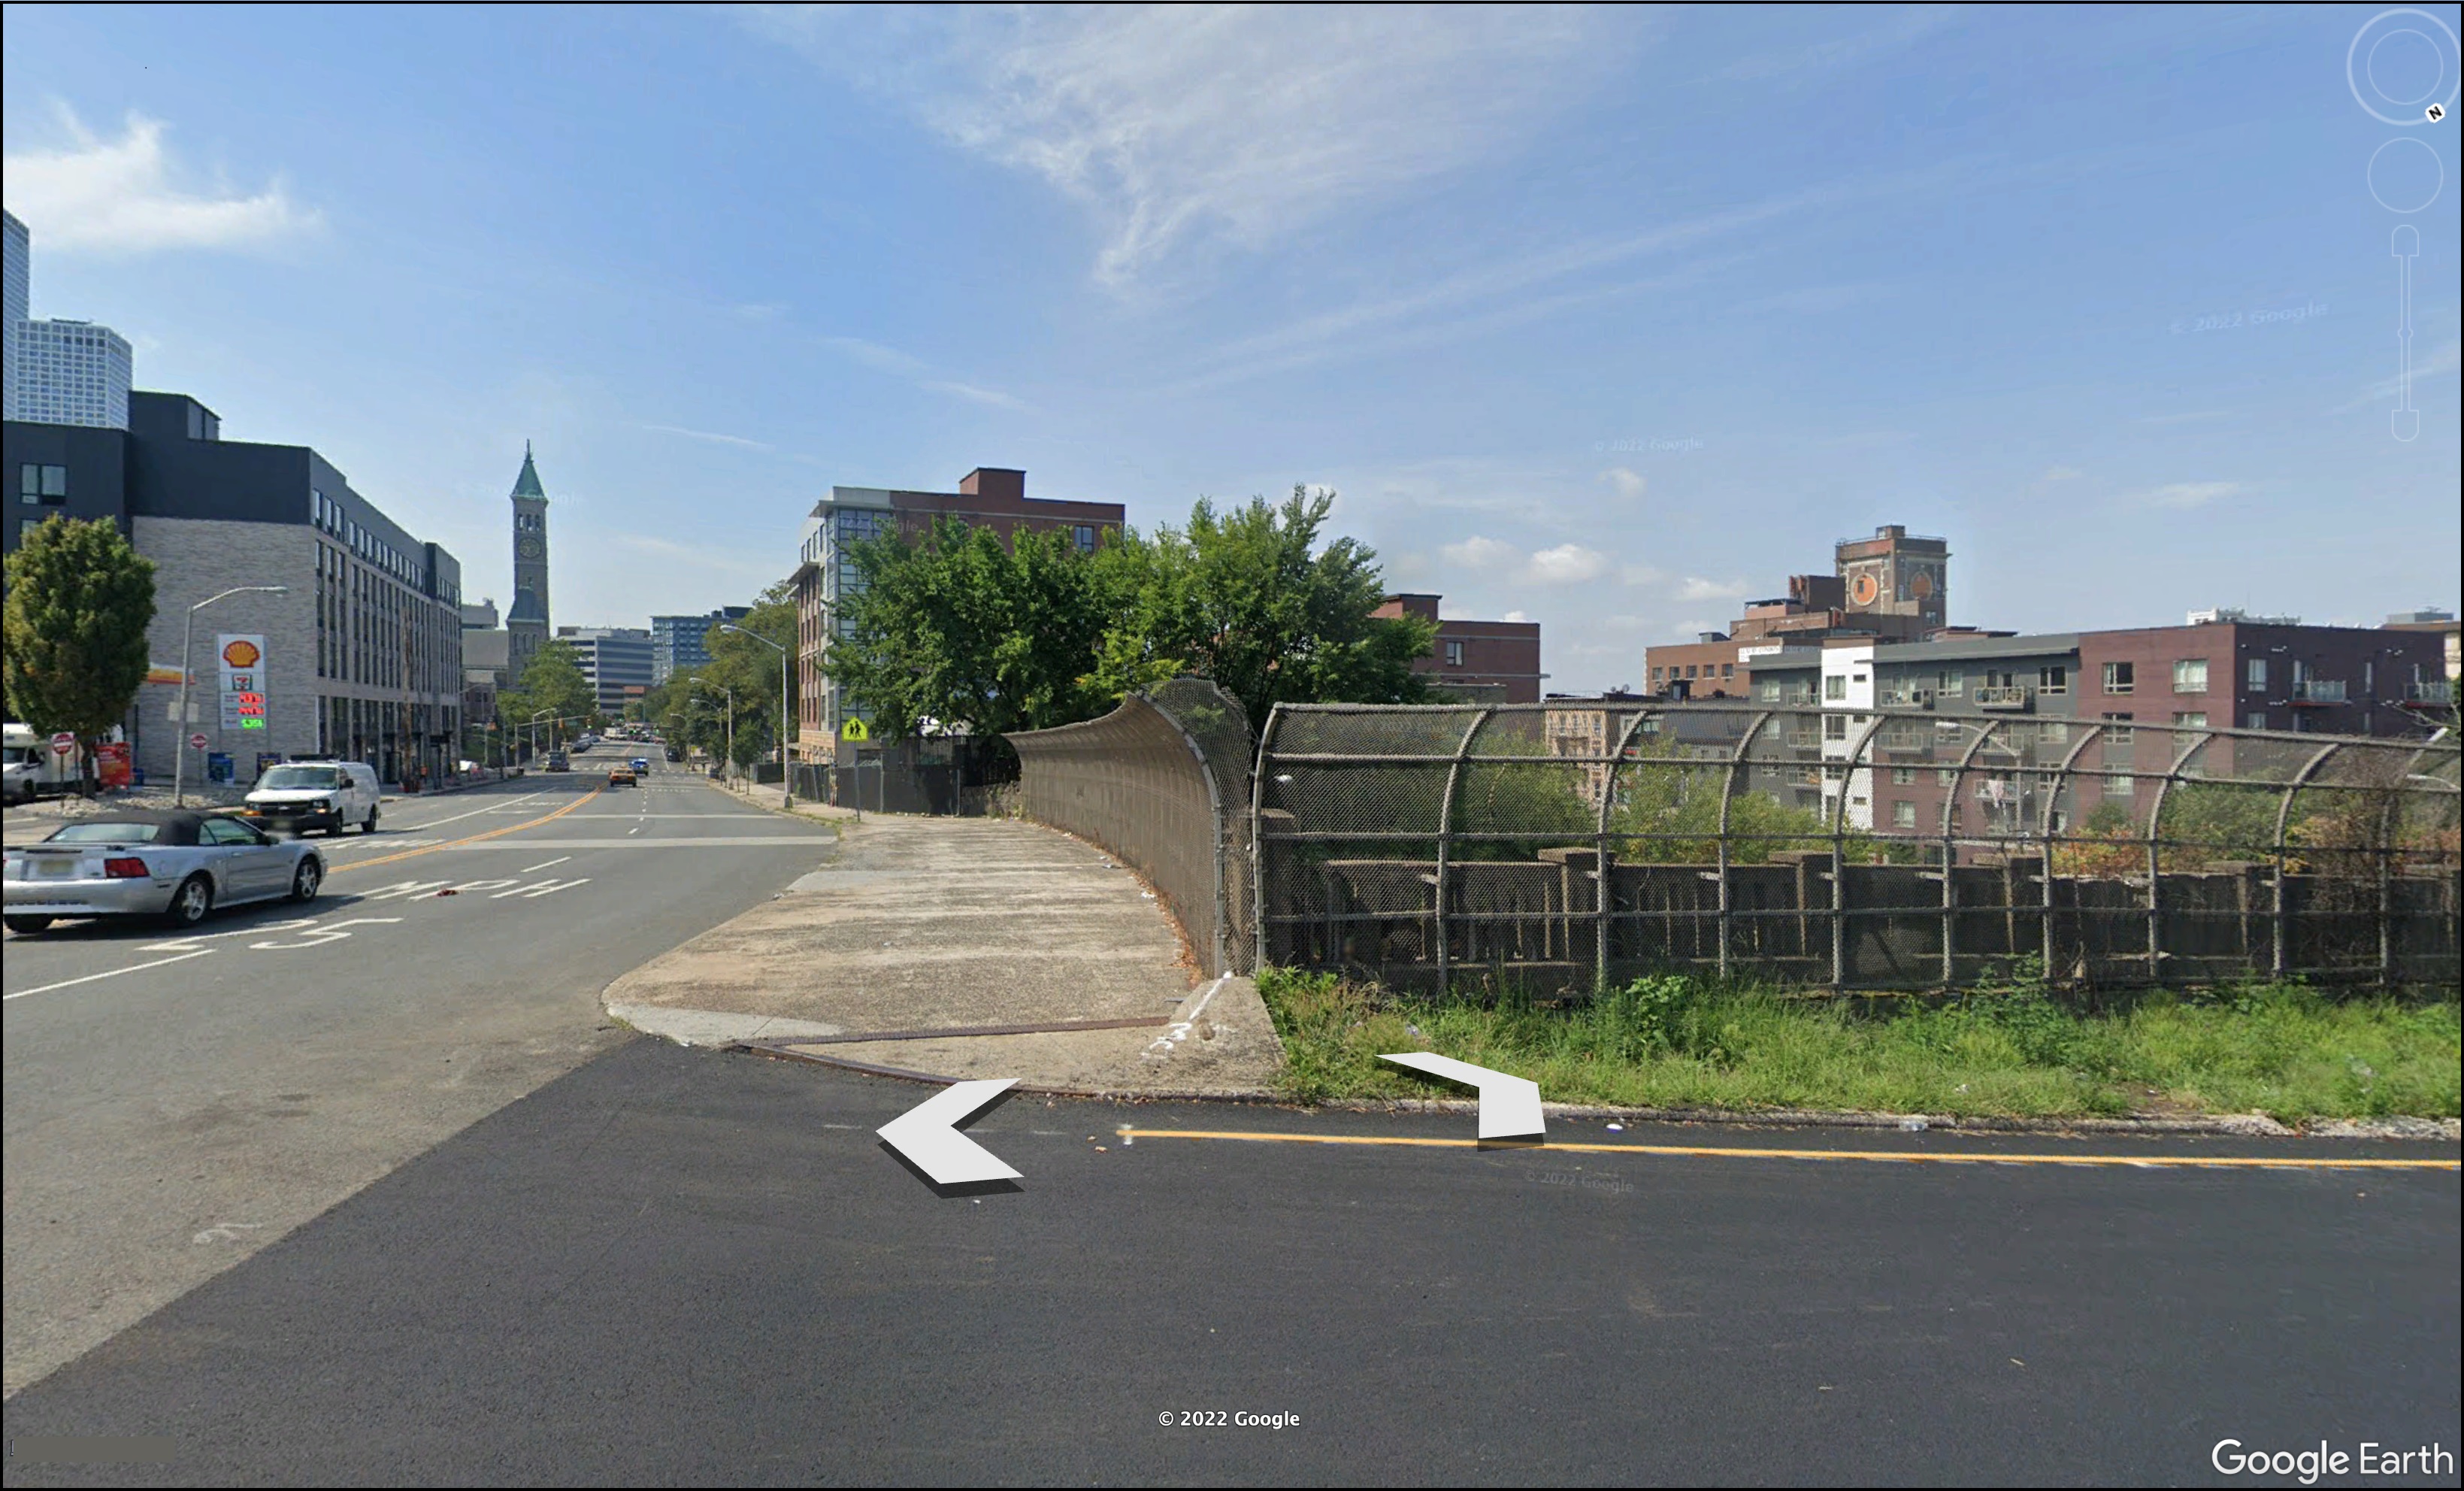 A.C. Chevrolet on Kennedy Boulevard in Jersey City is shielded by overgrowth on the right in this 2021 Google Earth image. In the distance, the tower of St. John the Baptist Roman Catholic Church rises.